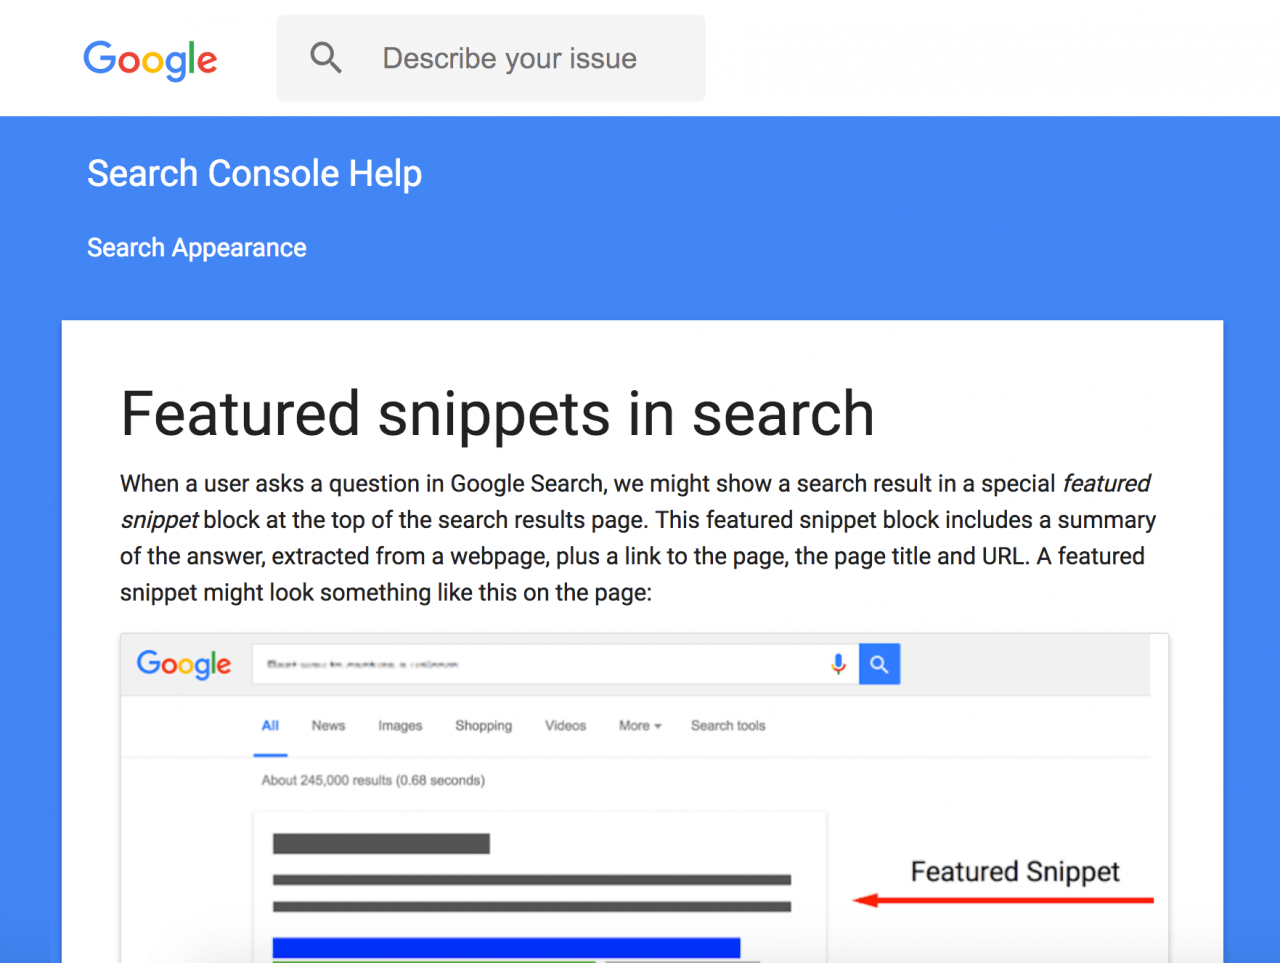 Xếp hạng trong mục Featured Snippets.